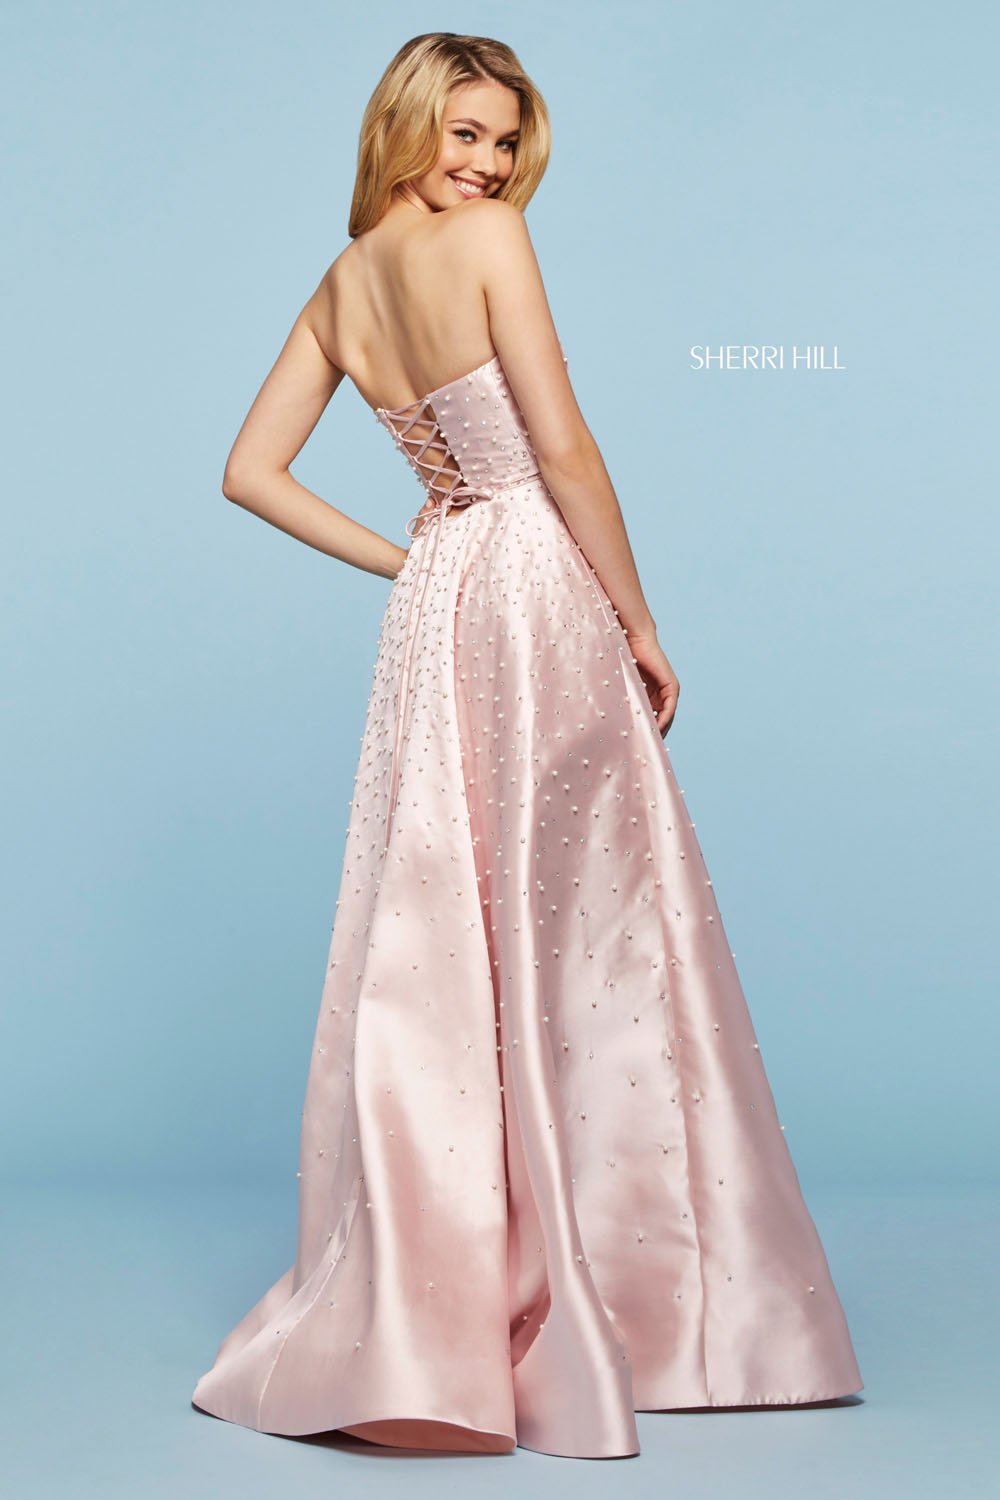 Sherri Hill 53421 dress images in these colors: Light Blue, Blush, Yellow, Ivory.